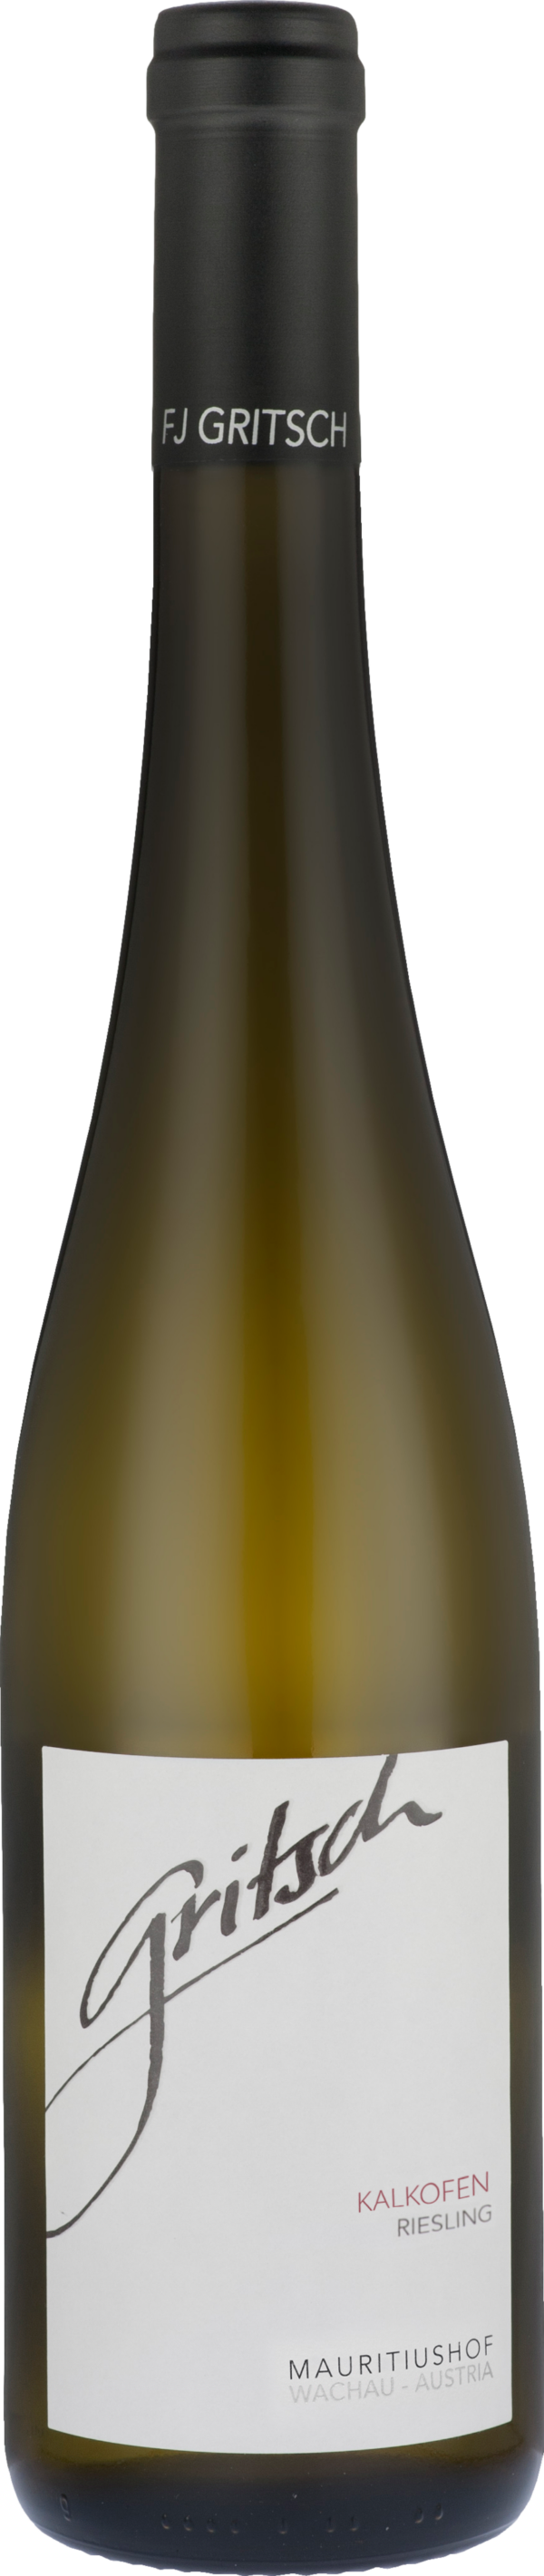 Product image of FJ Gritsch Riesling Kalkofen Smaragd 2022 from 8wines